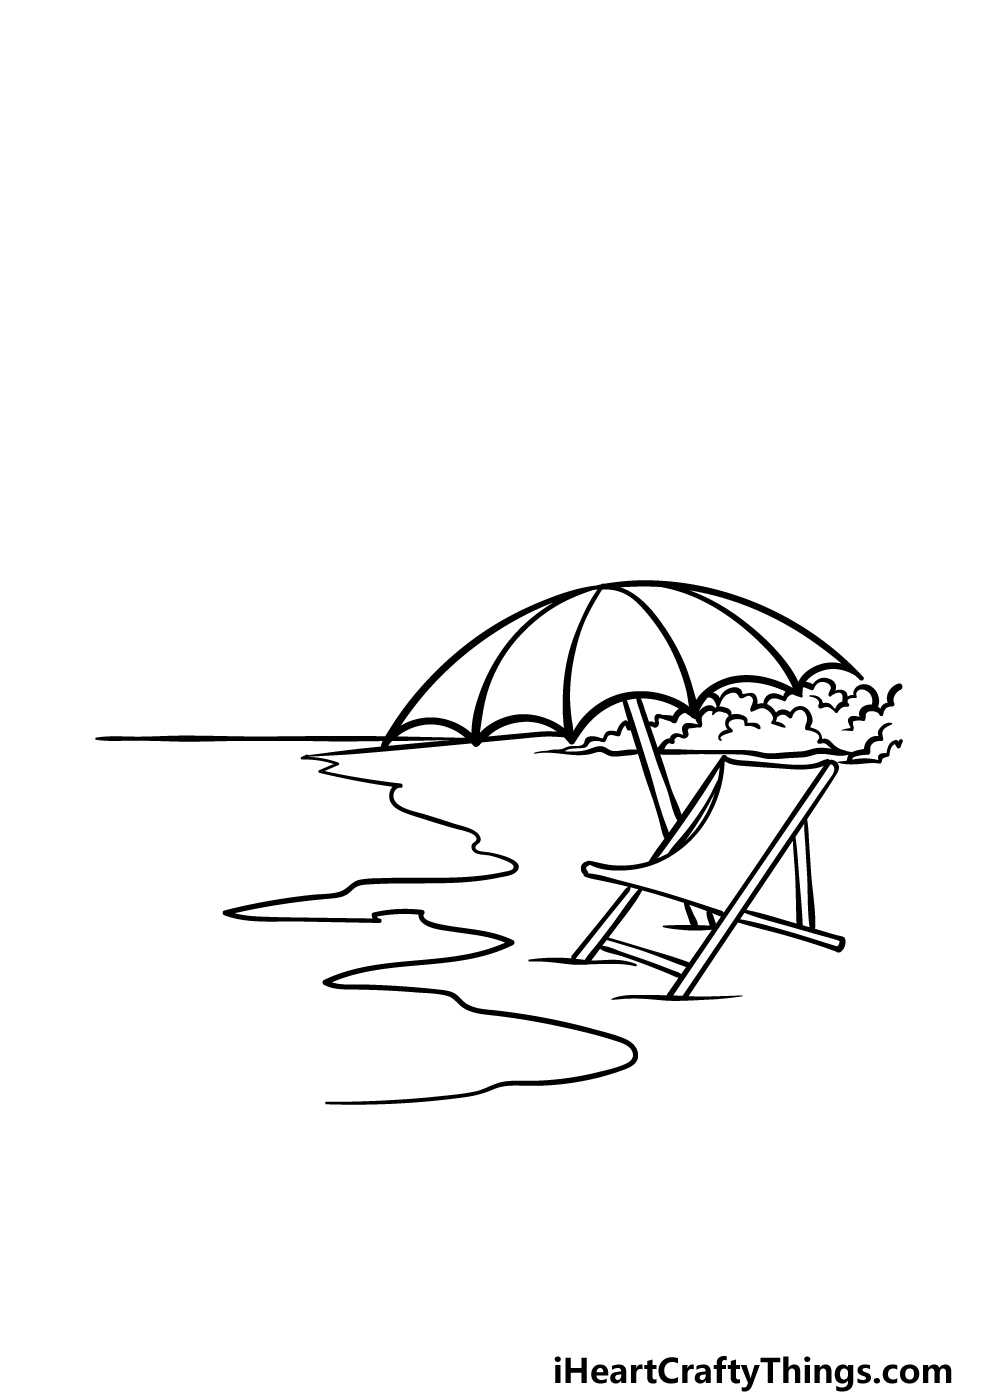 how to draw a Beach step 2